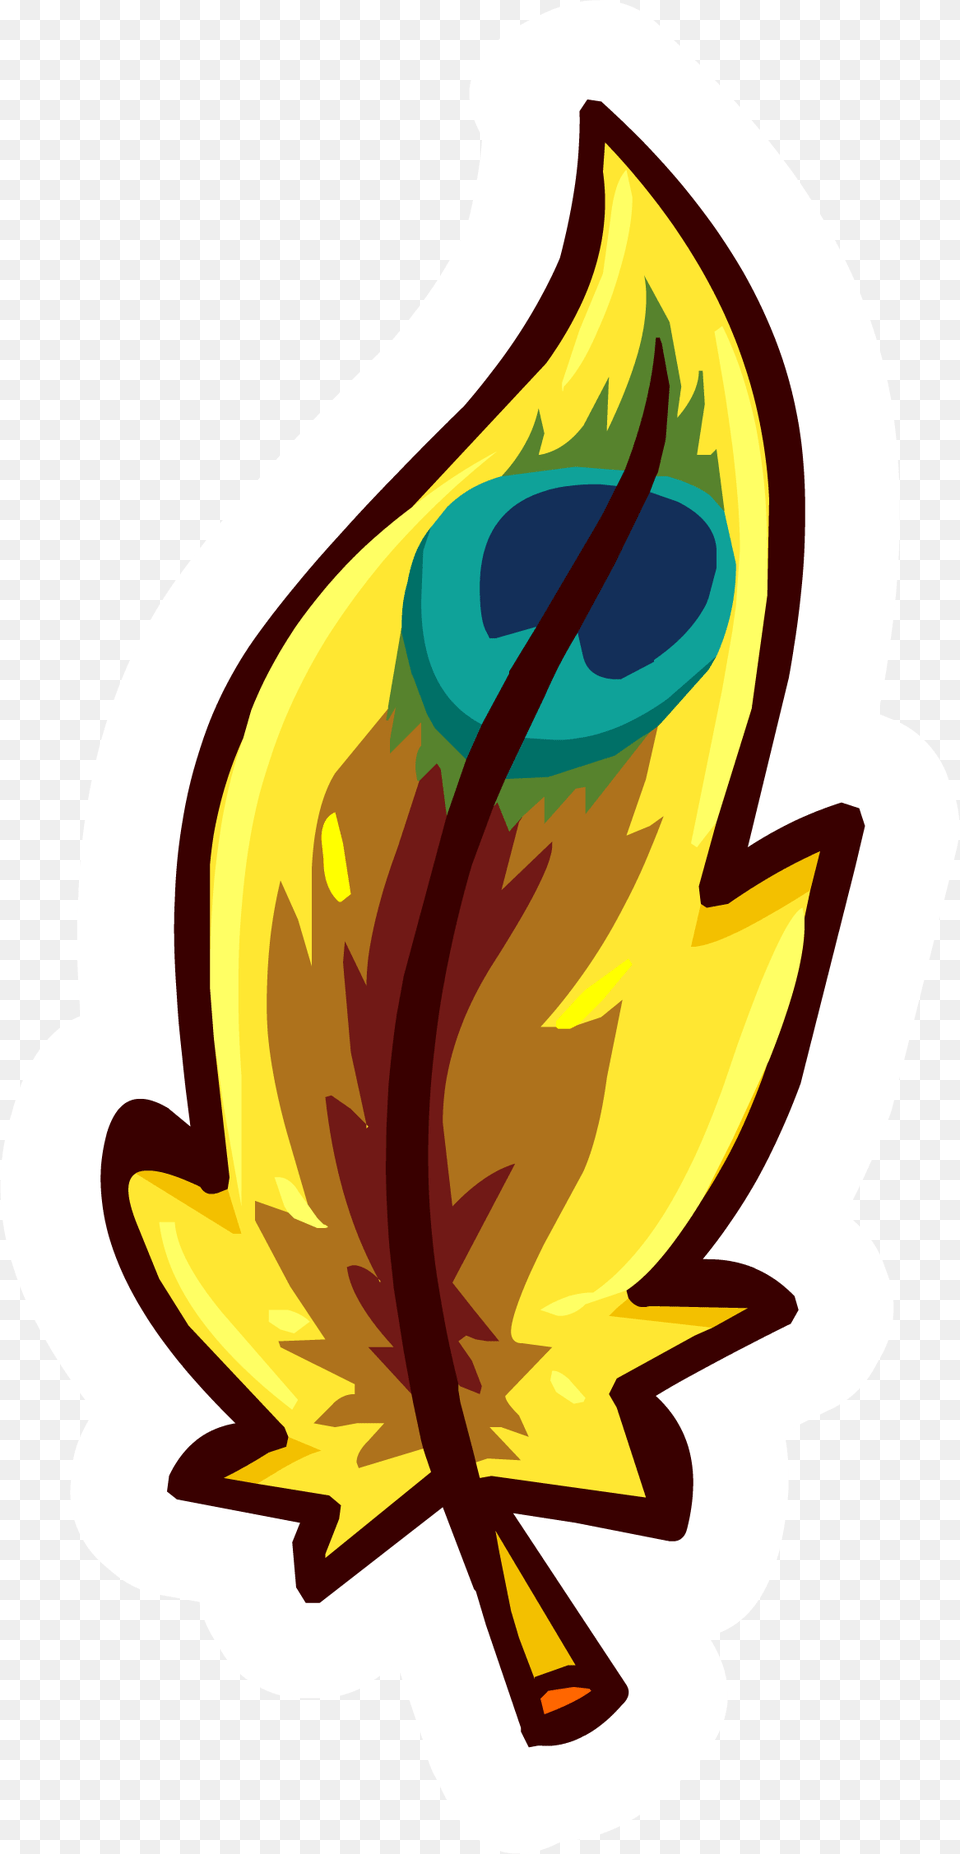 Tropical Feather 1 Feather Club Penguin, Light, Fire, Flame, Pattern Free Transparent Png